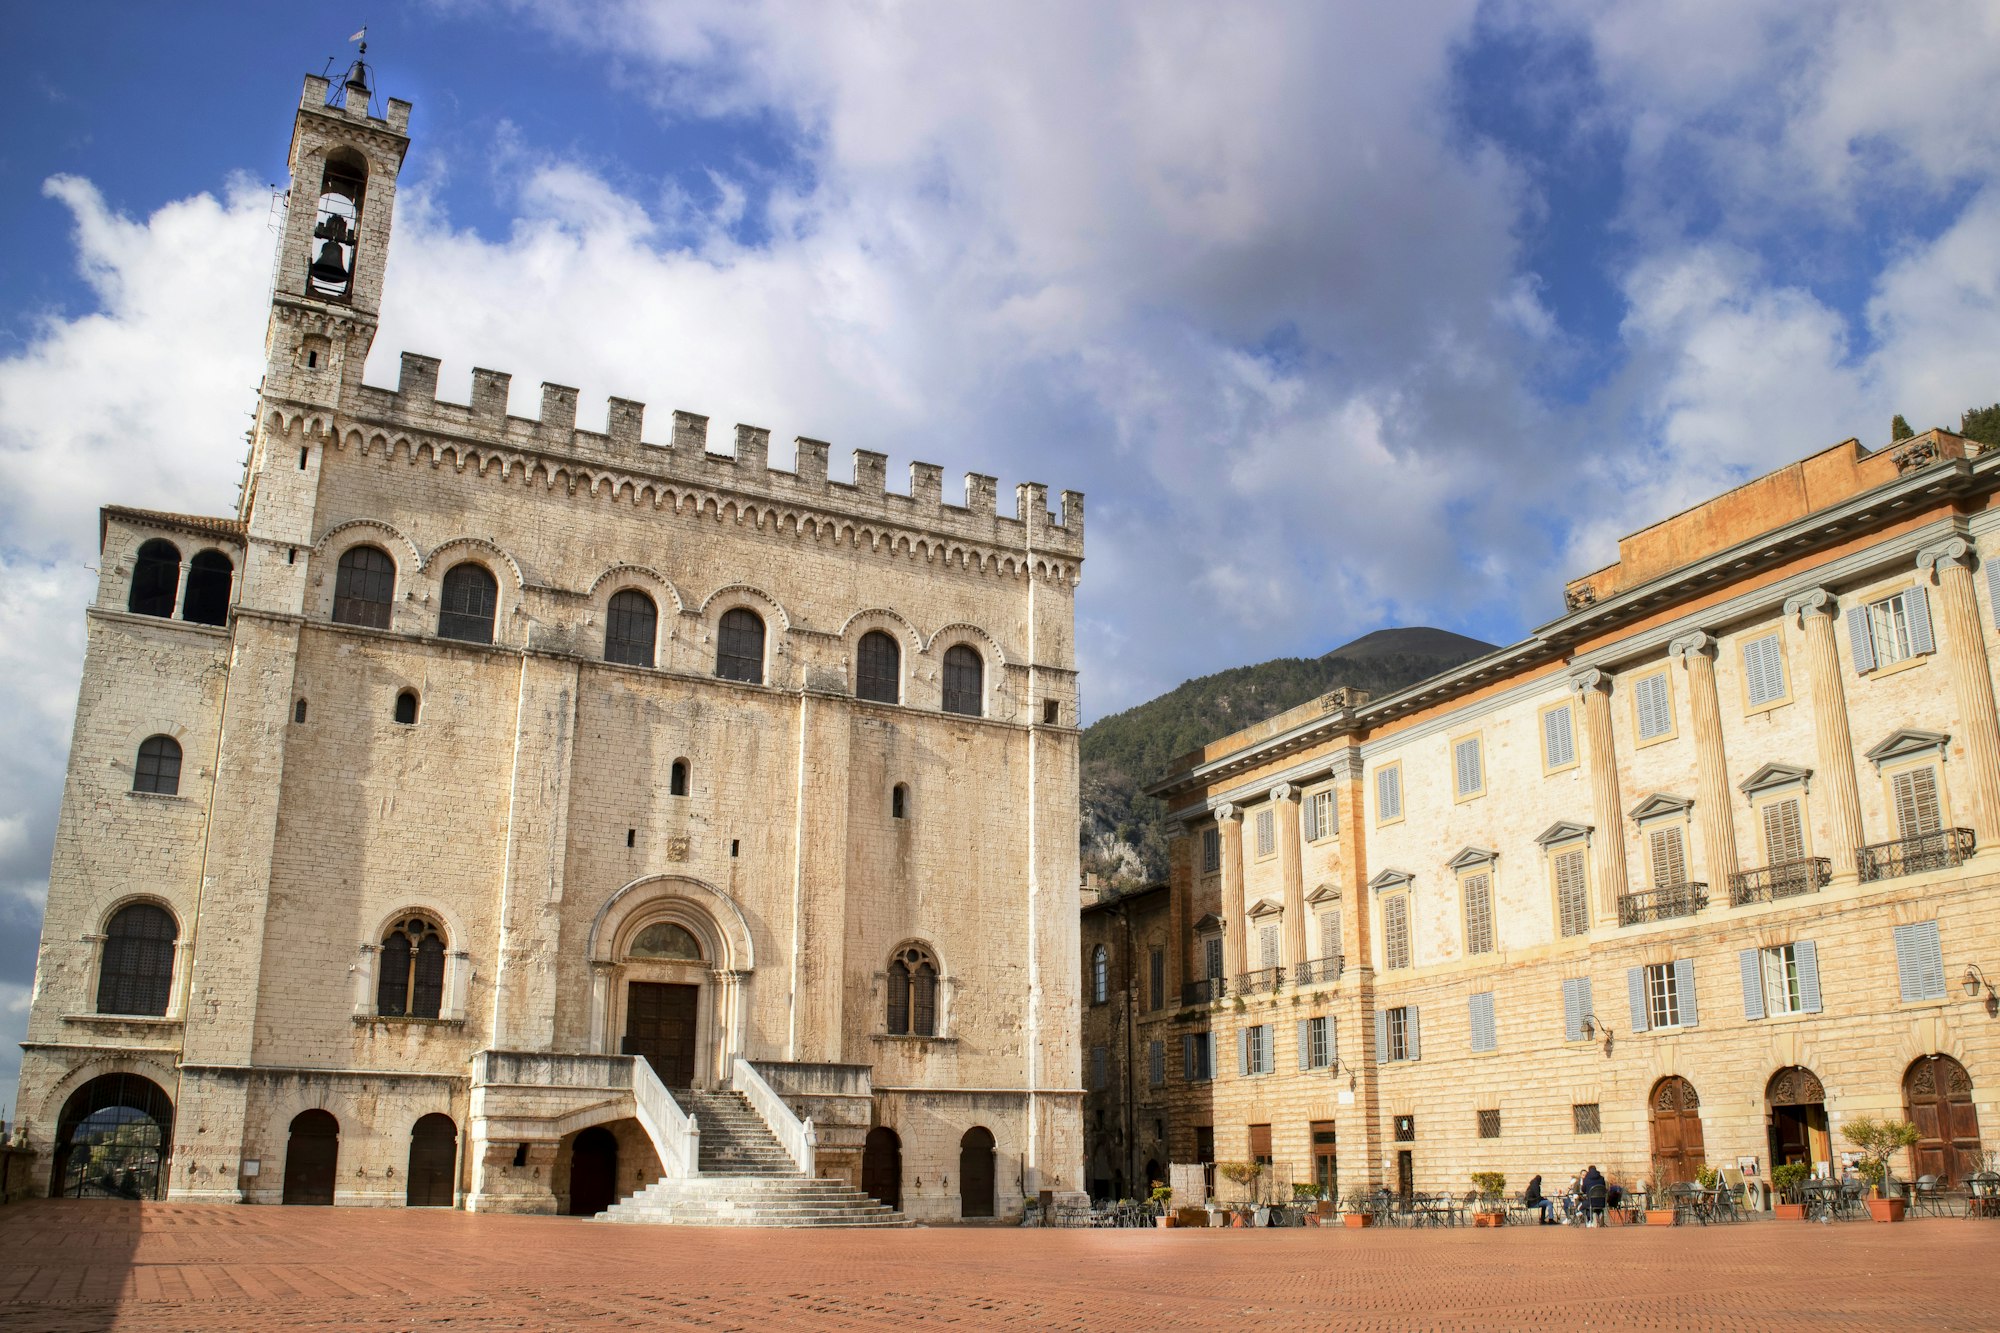 Central Italy The medieval square of Gubbio Umbria